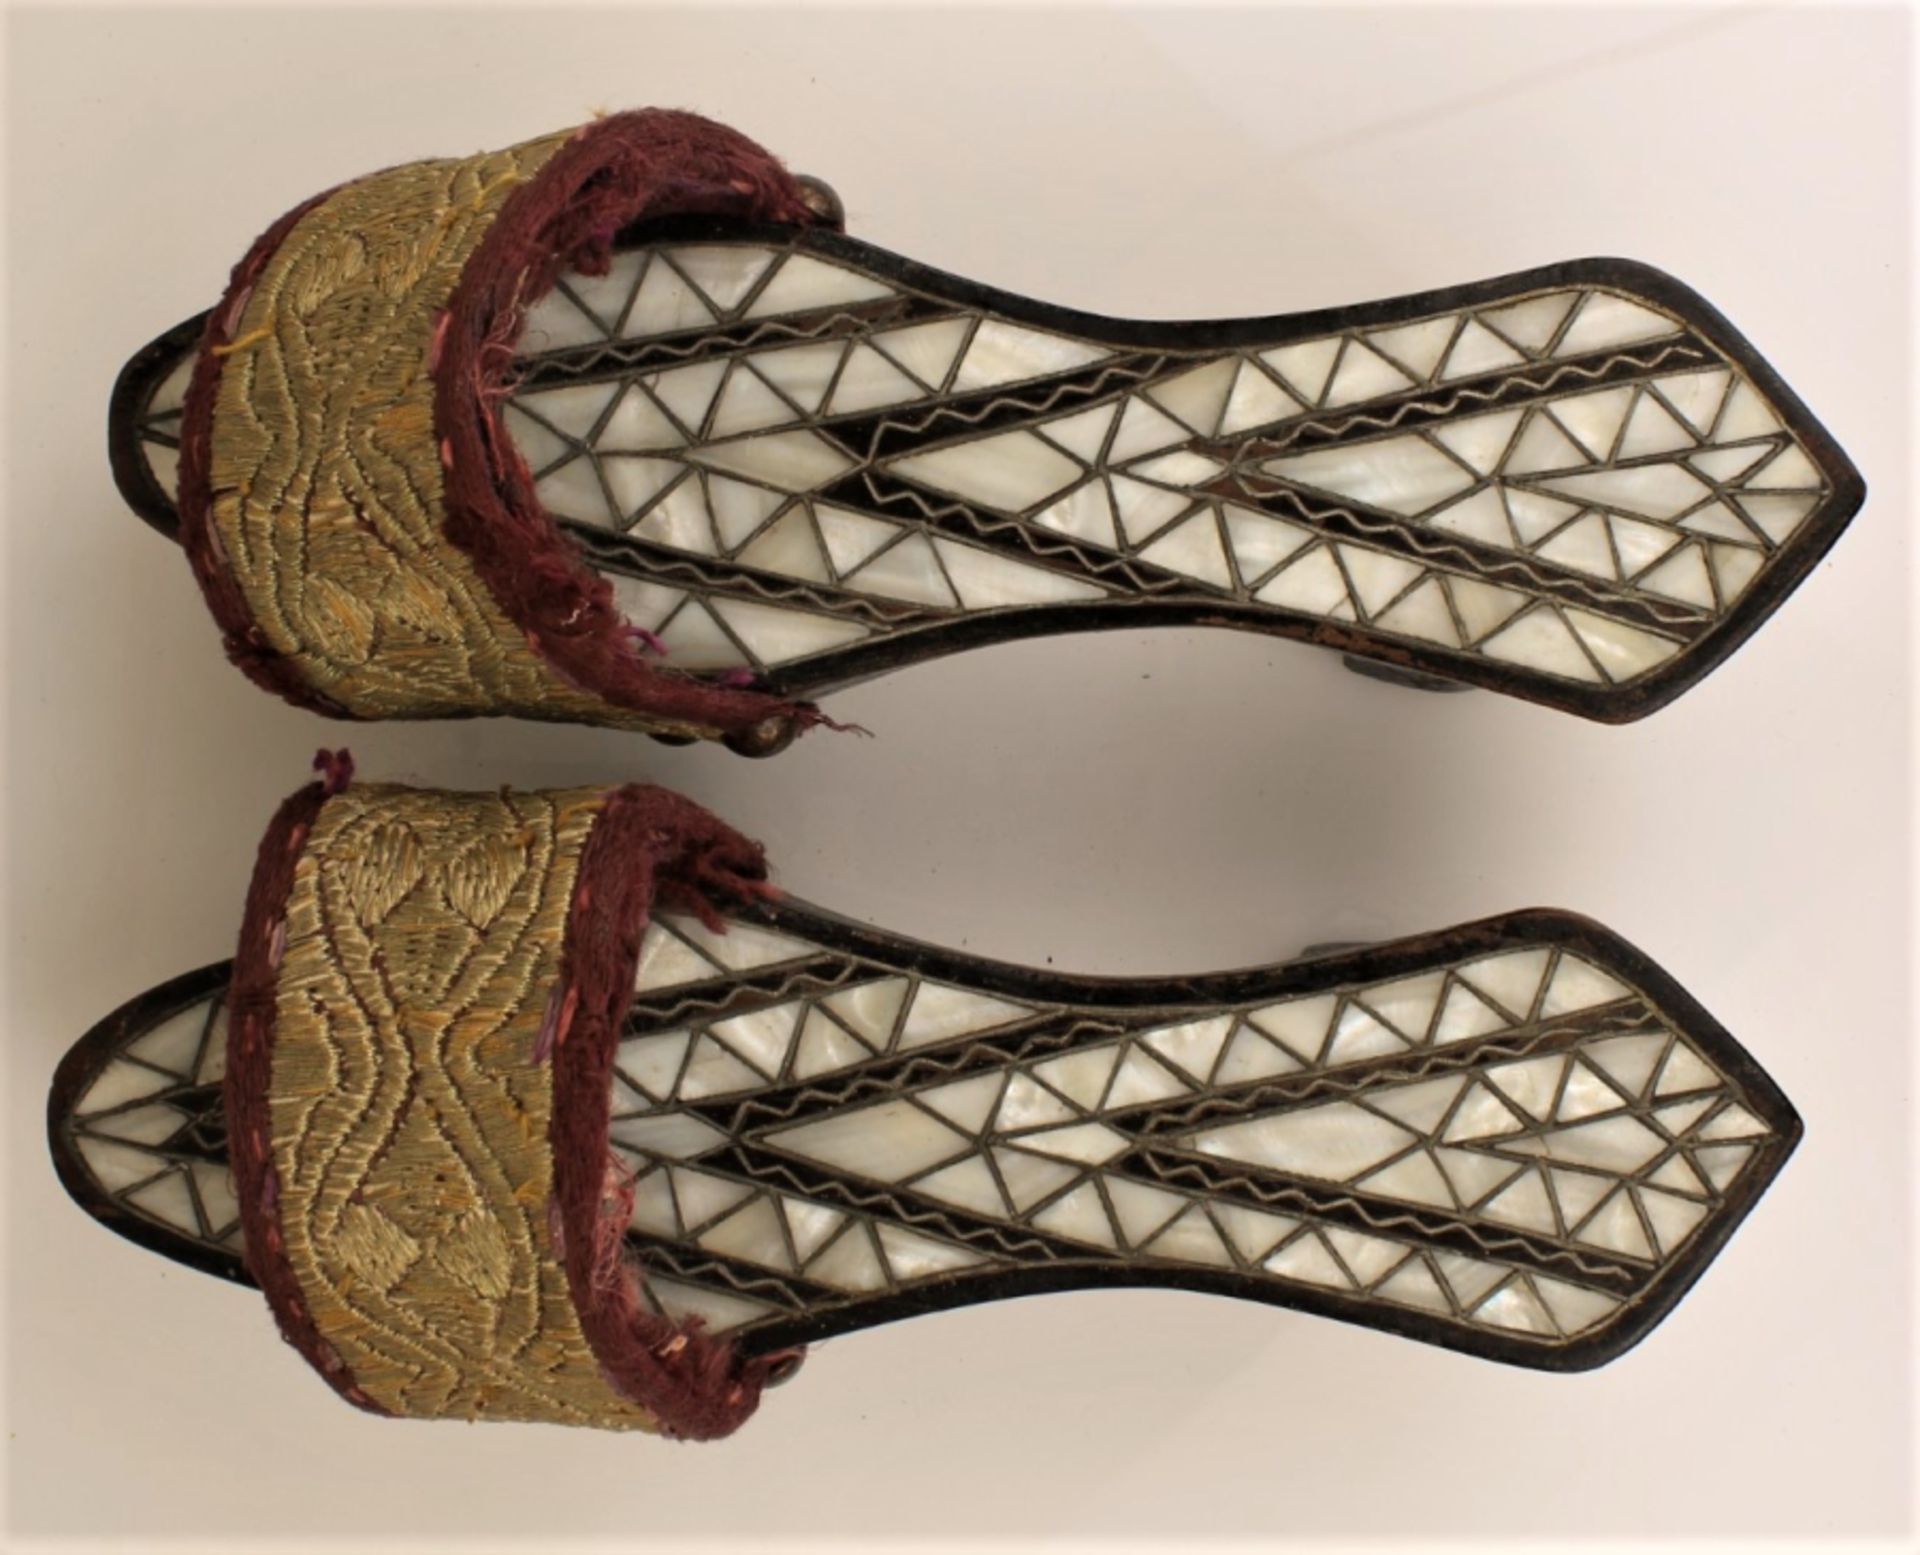 19th century Ottoman Ladies shoes - Image 2 of 3